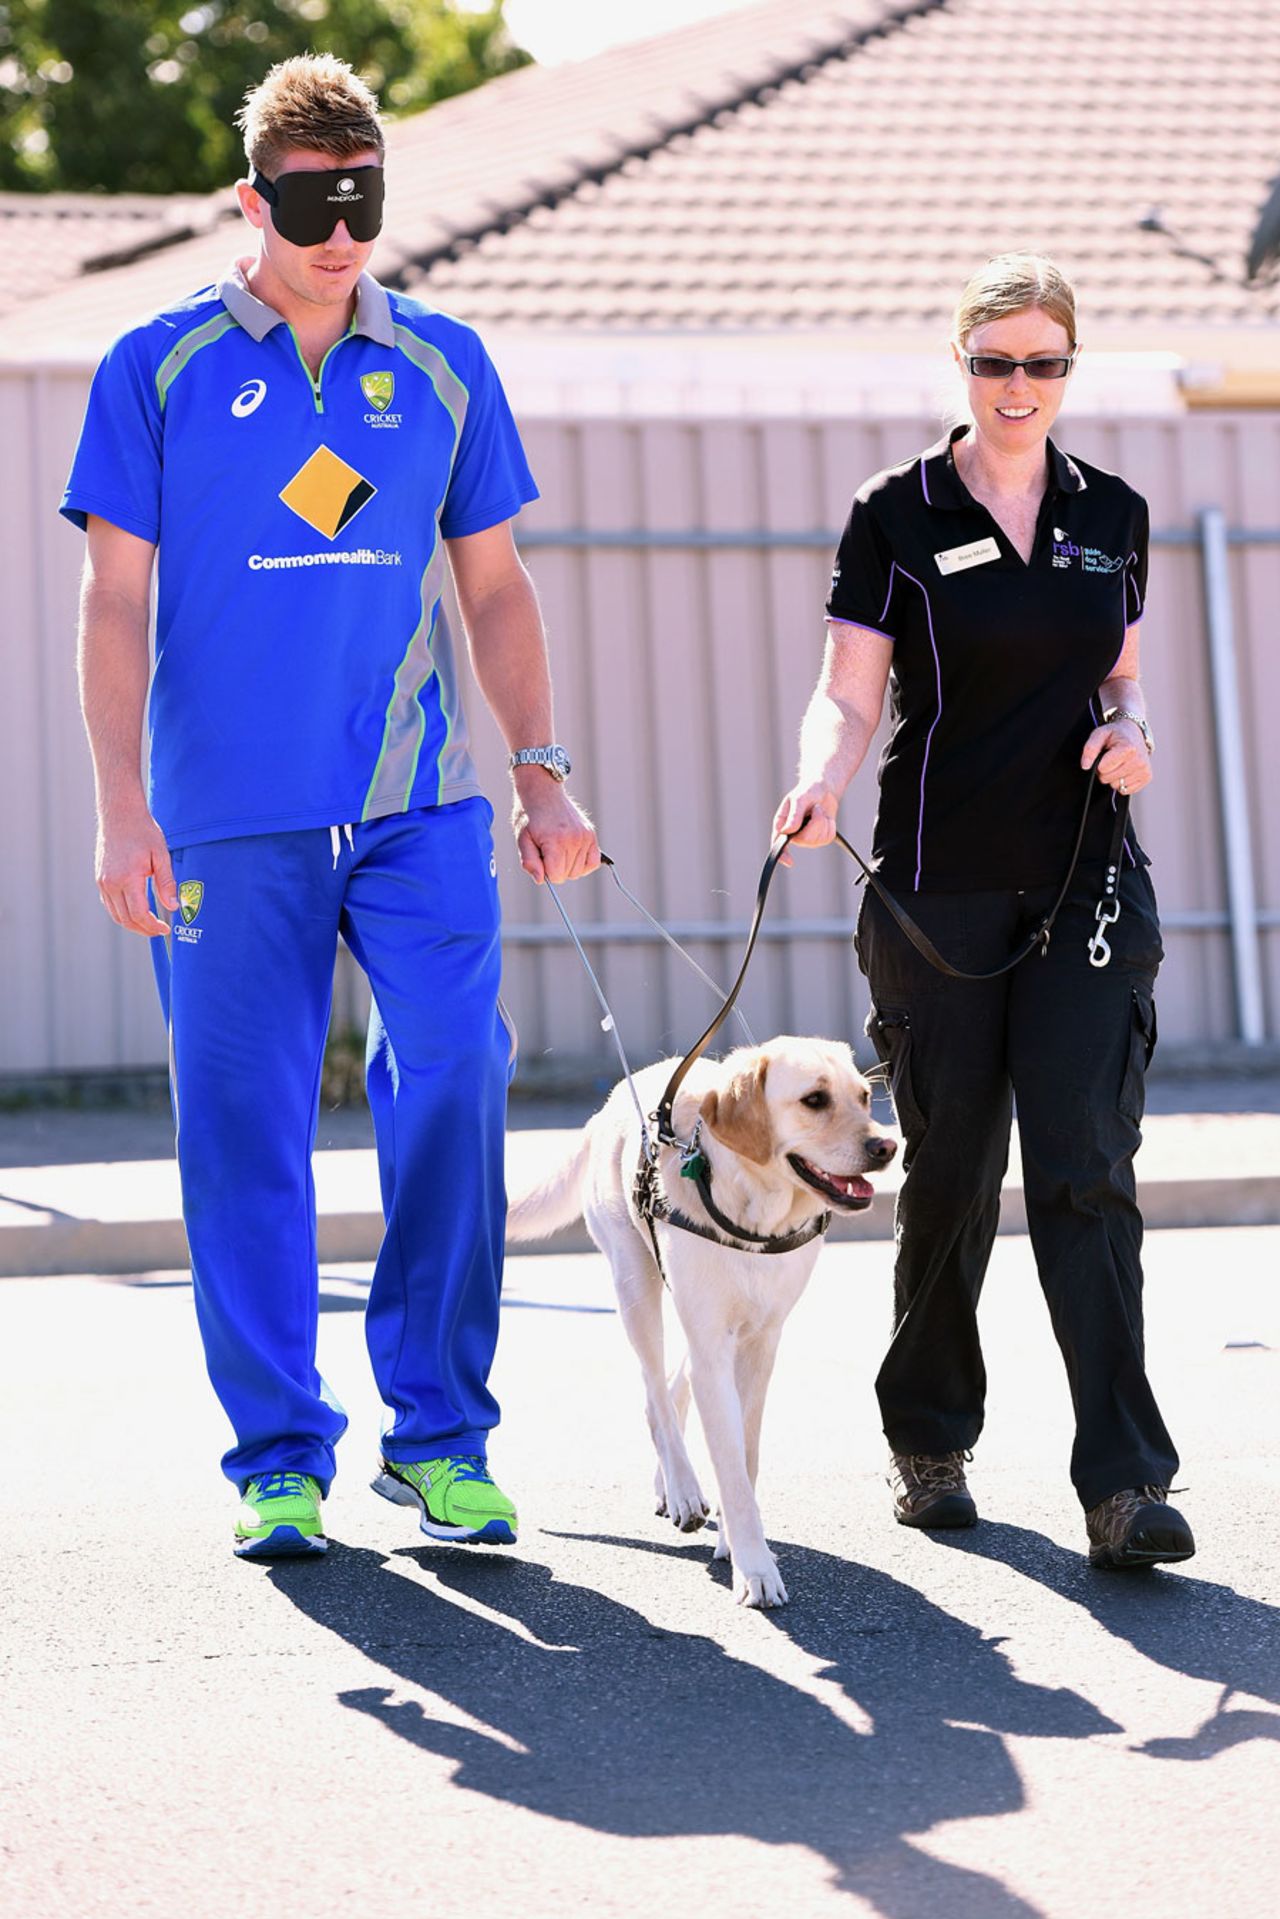 James Faulkner walks with a guide dog, Adelaide, January 25, 2016